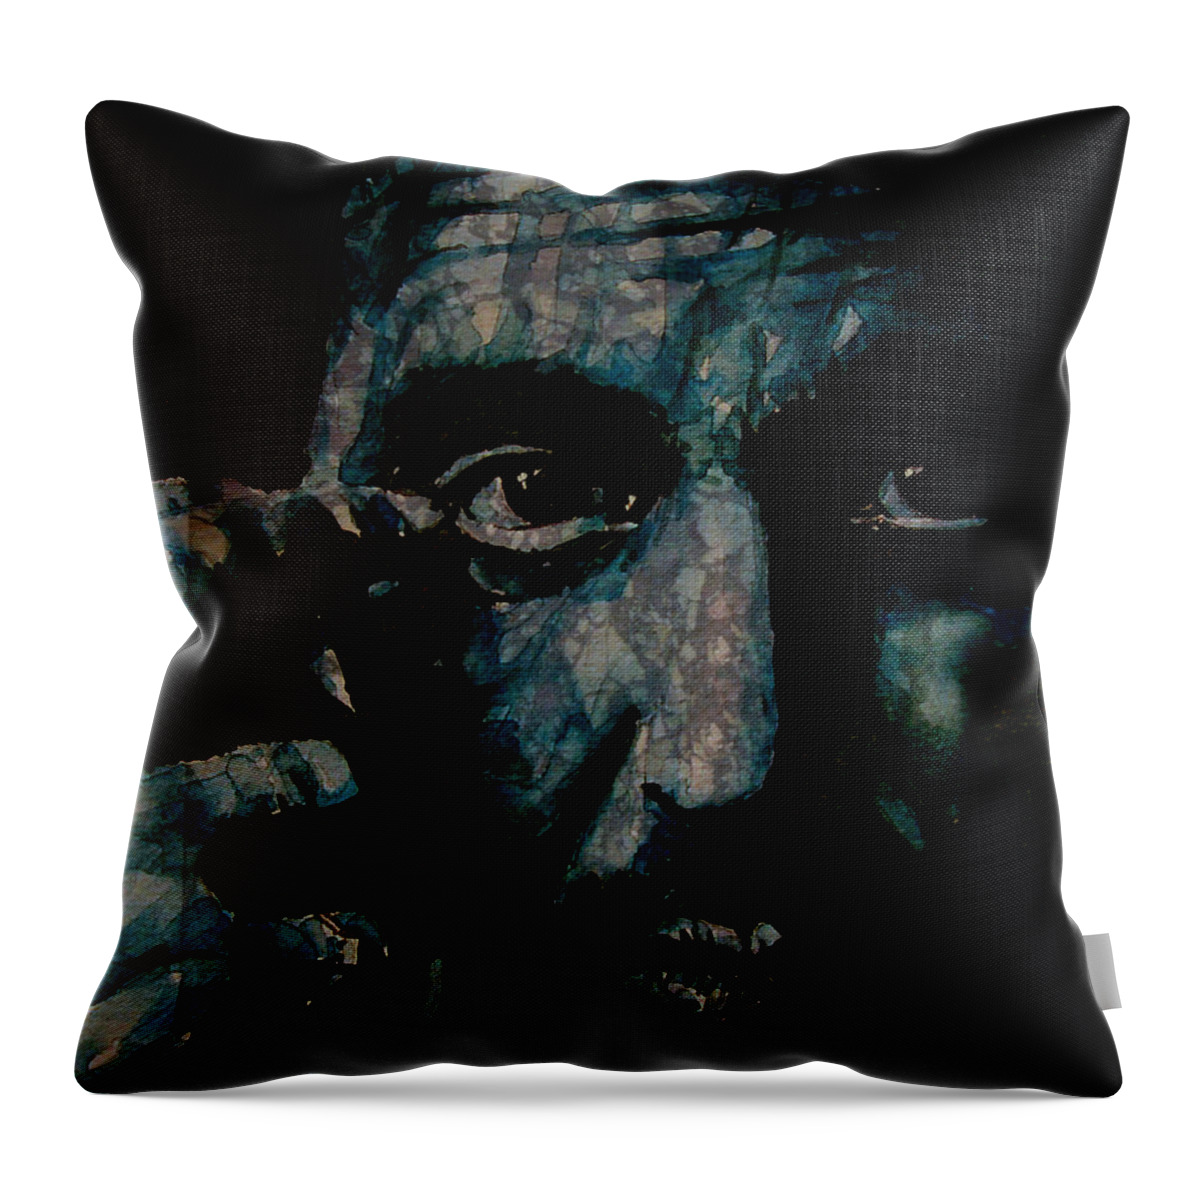 Al Pacino Throw Pillow featuring the painting Al Pacino by Paul Lovering